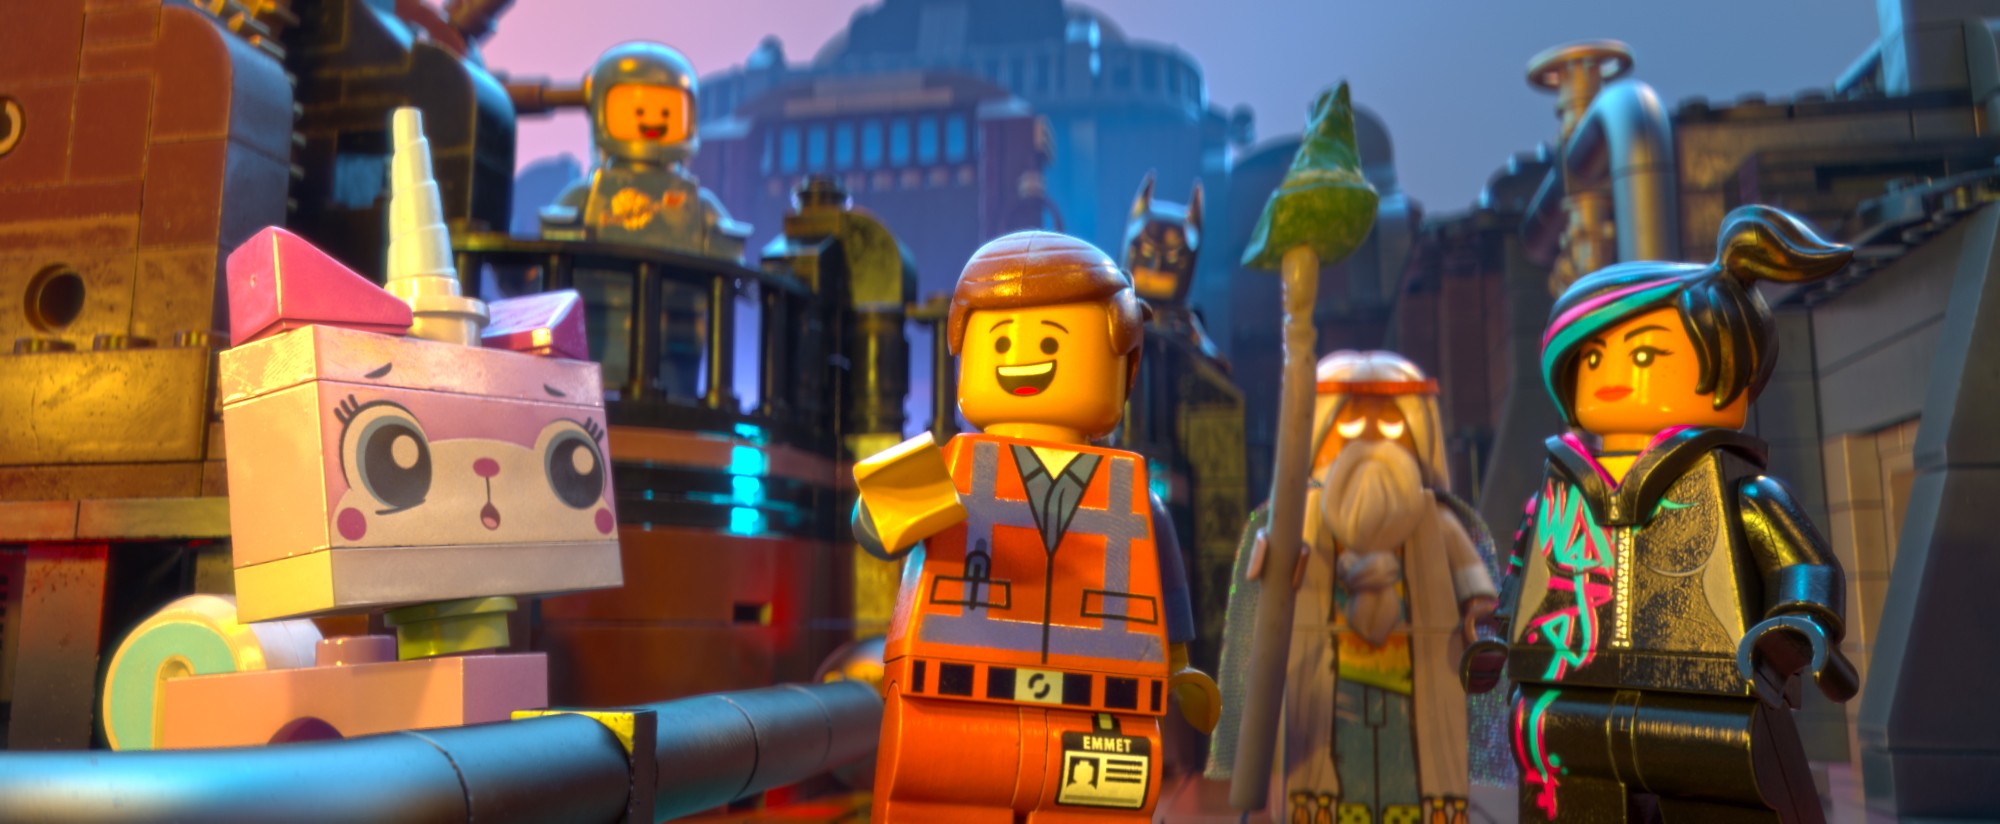 Top 10 LEGO Movie Sets Released TOO EARLY! 